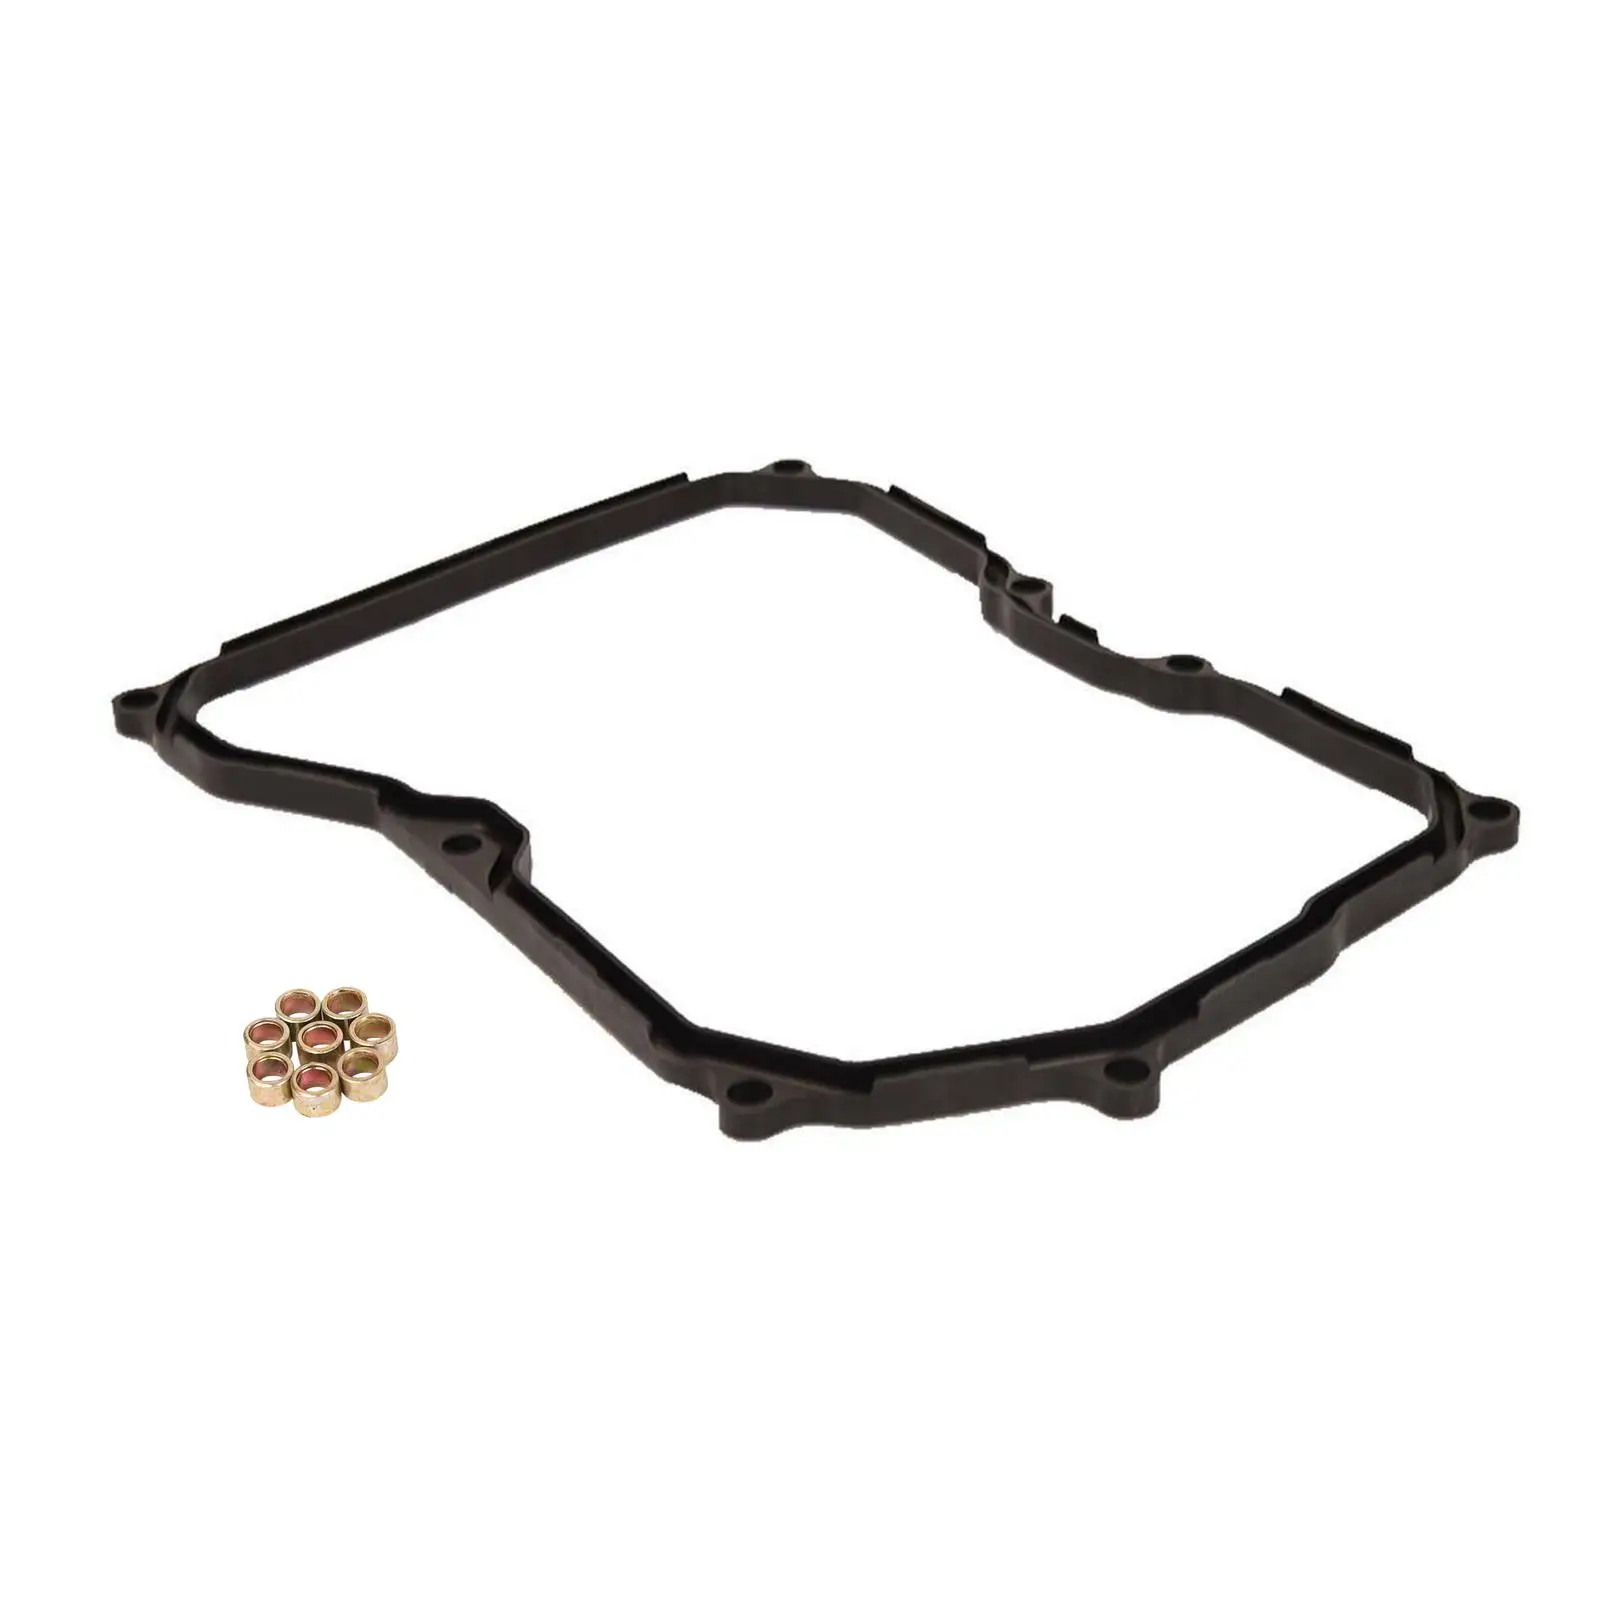 Transmission Pan Gasket Lightweight Durable 24117566356 for Mini Replacement Parts Easy to Install Accessories